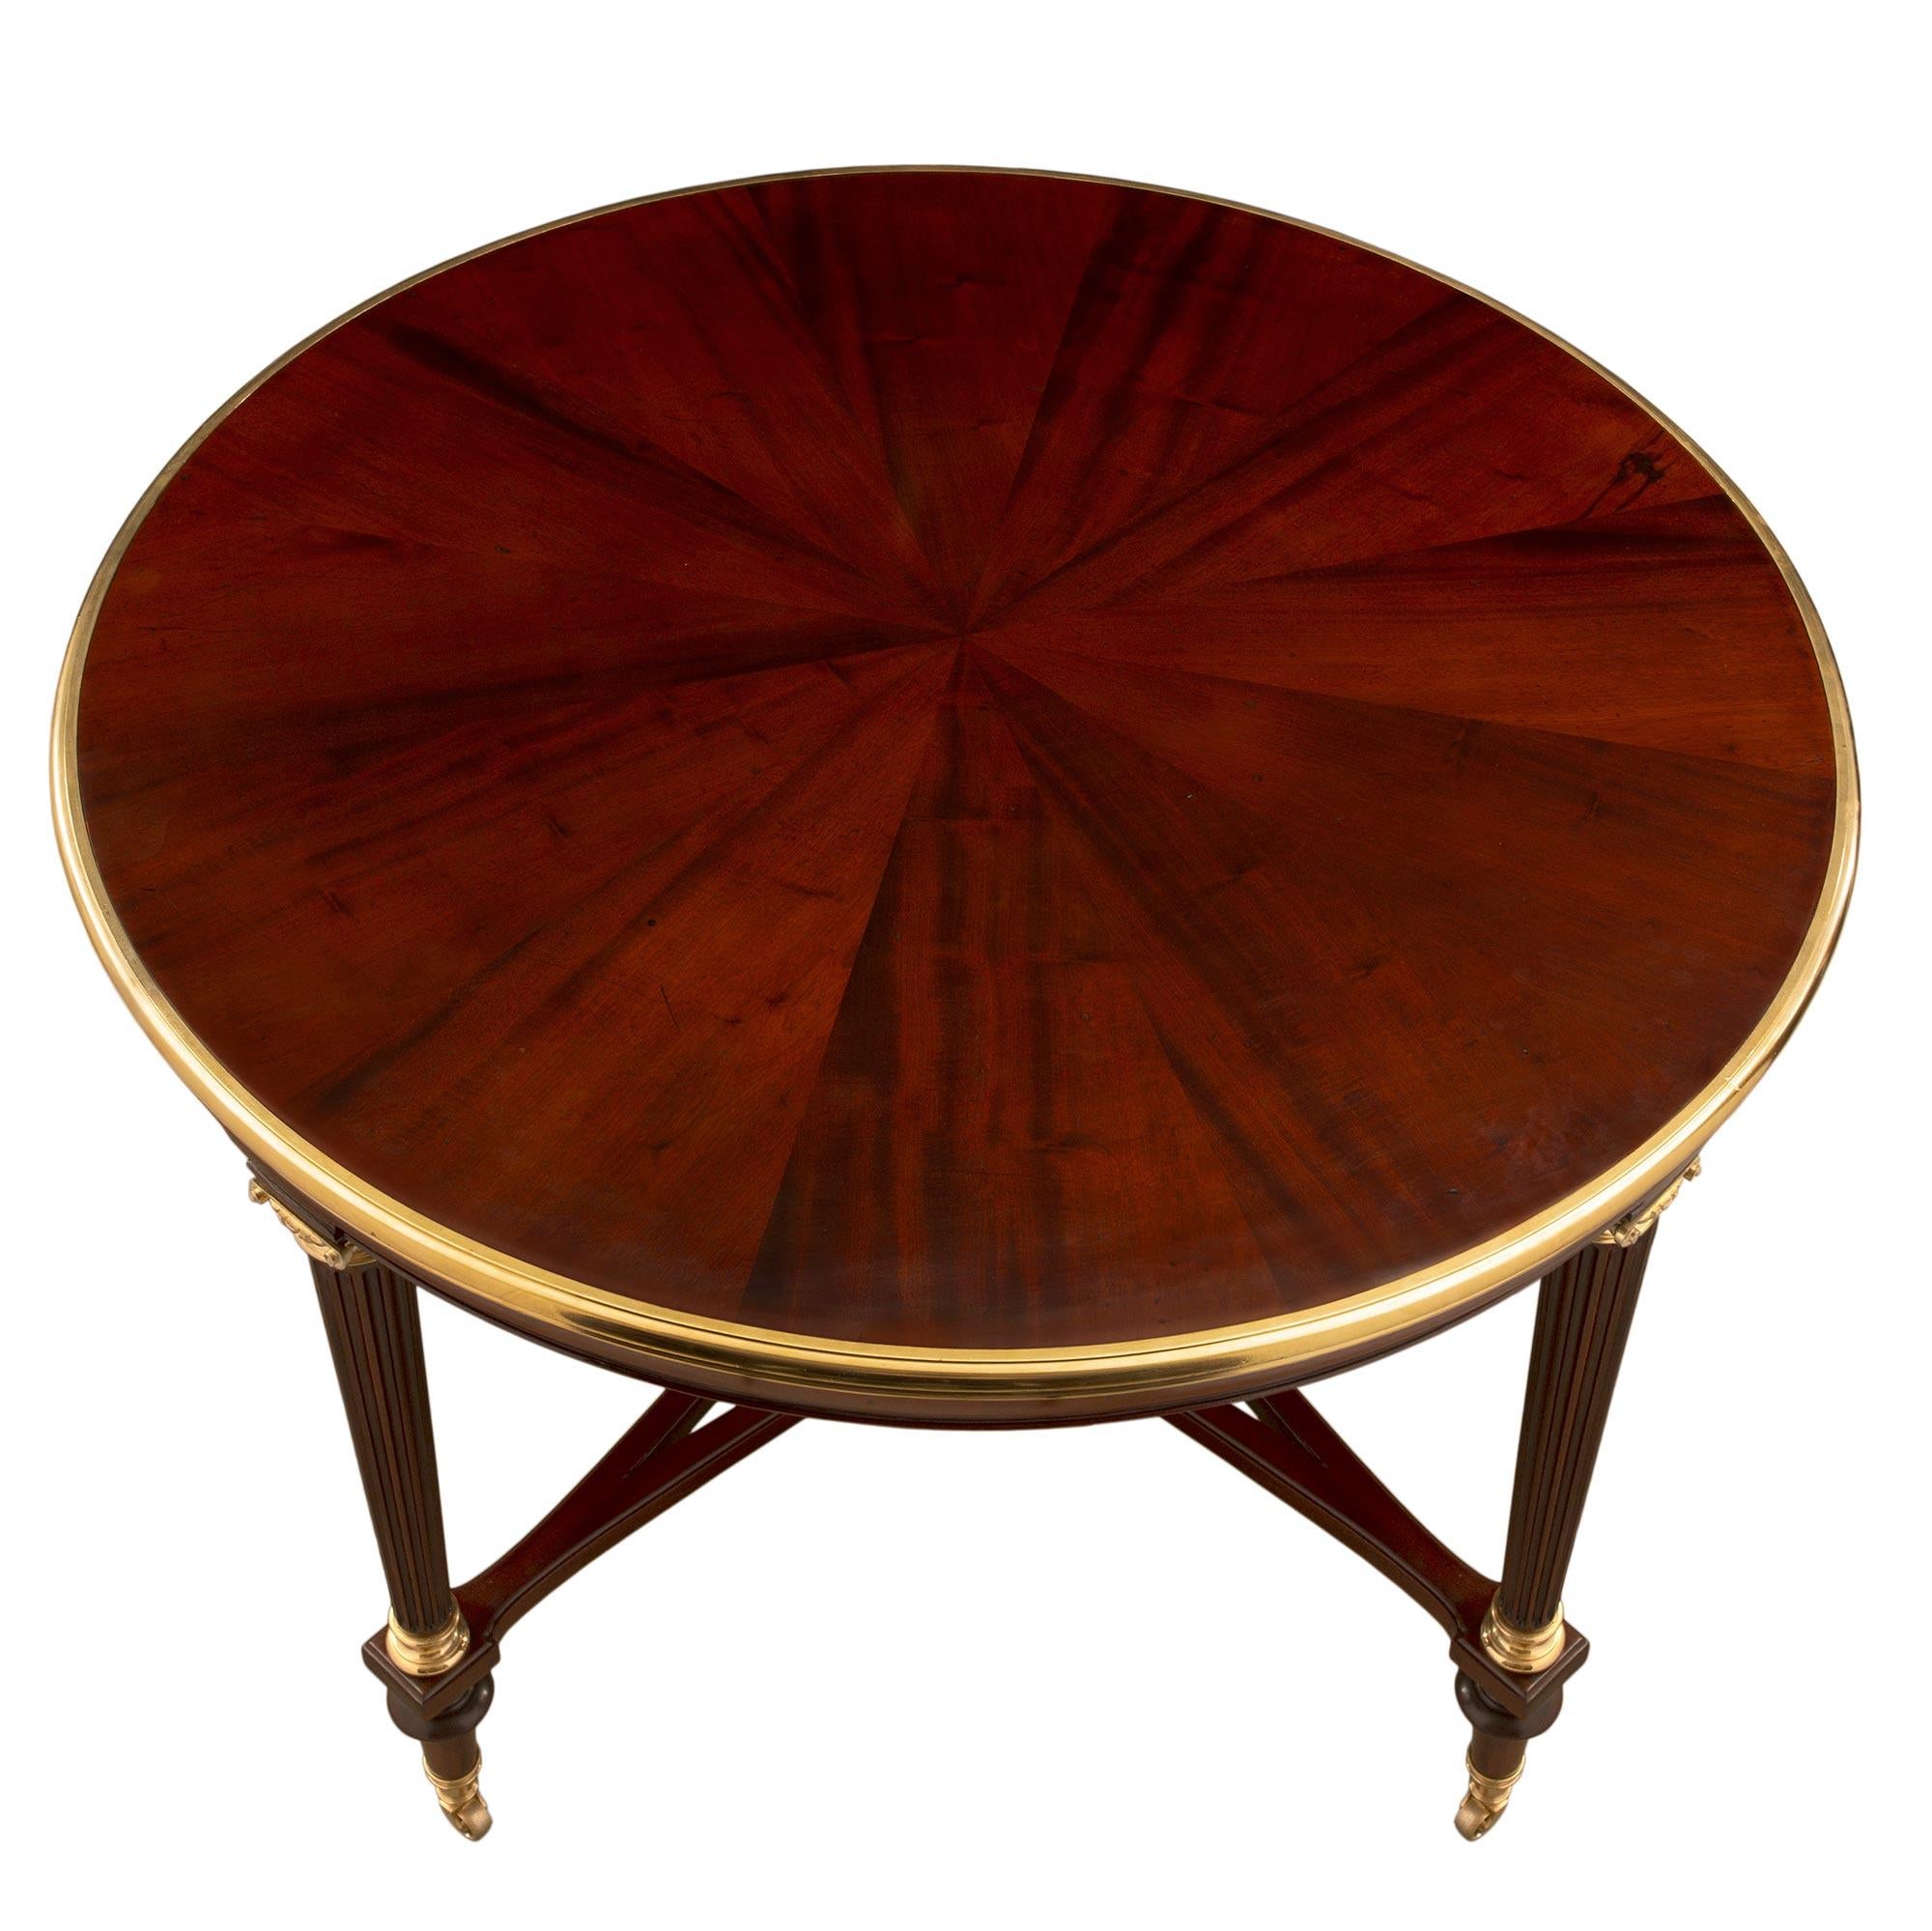 An extremely elegant pair of French 19th century Louis XVI st. solid mahogany and ormolu center tables, attributed to Henry Dasson. Each table is raised by Fine elongated topie shaped feet with their original ormolu casters. Each of the slender